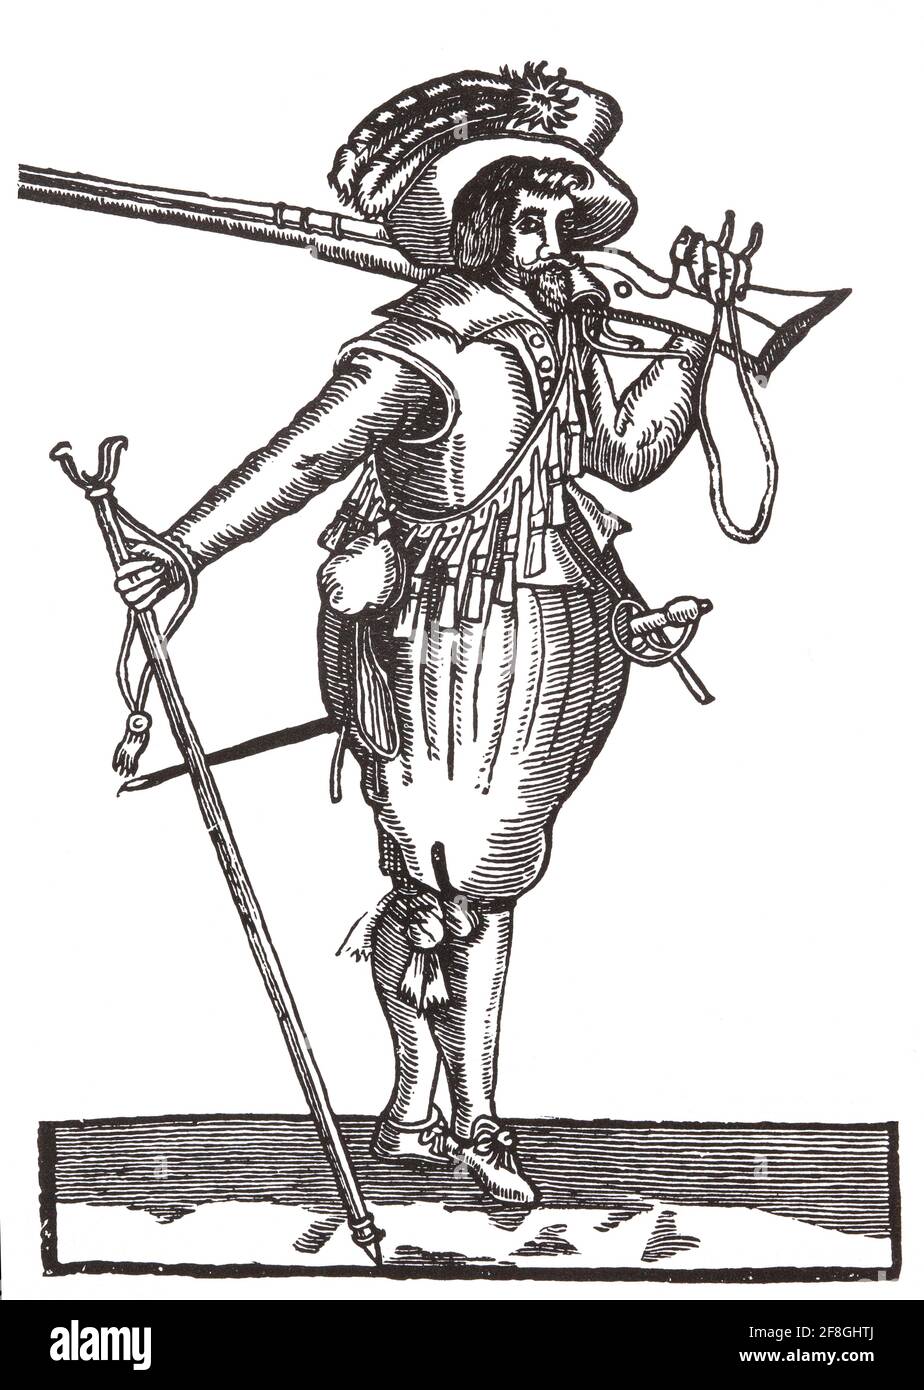 17th century musketeer, the forerunners of the rifleman, were an important part of early modern armies, particularly in Europe as they normally comprised the majority of their infantry. The musket could fire at most, two rounds per minute, and was accurate upto about 30 meteres. In this illustration the musketeer has a wooden support required when firing the weapon. Stock Photo